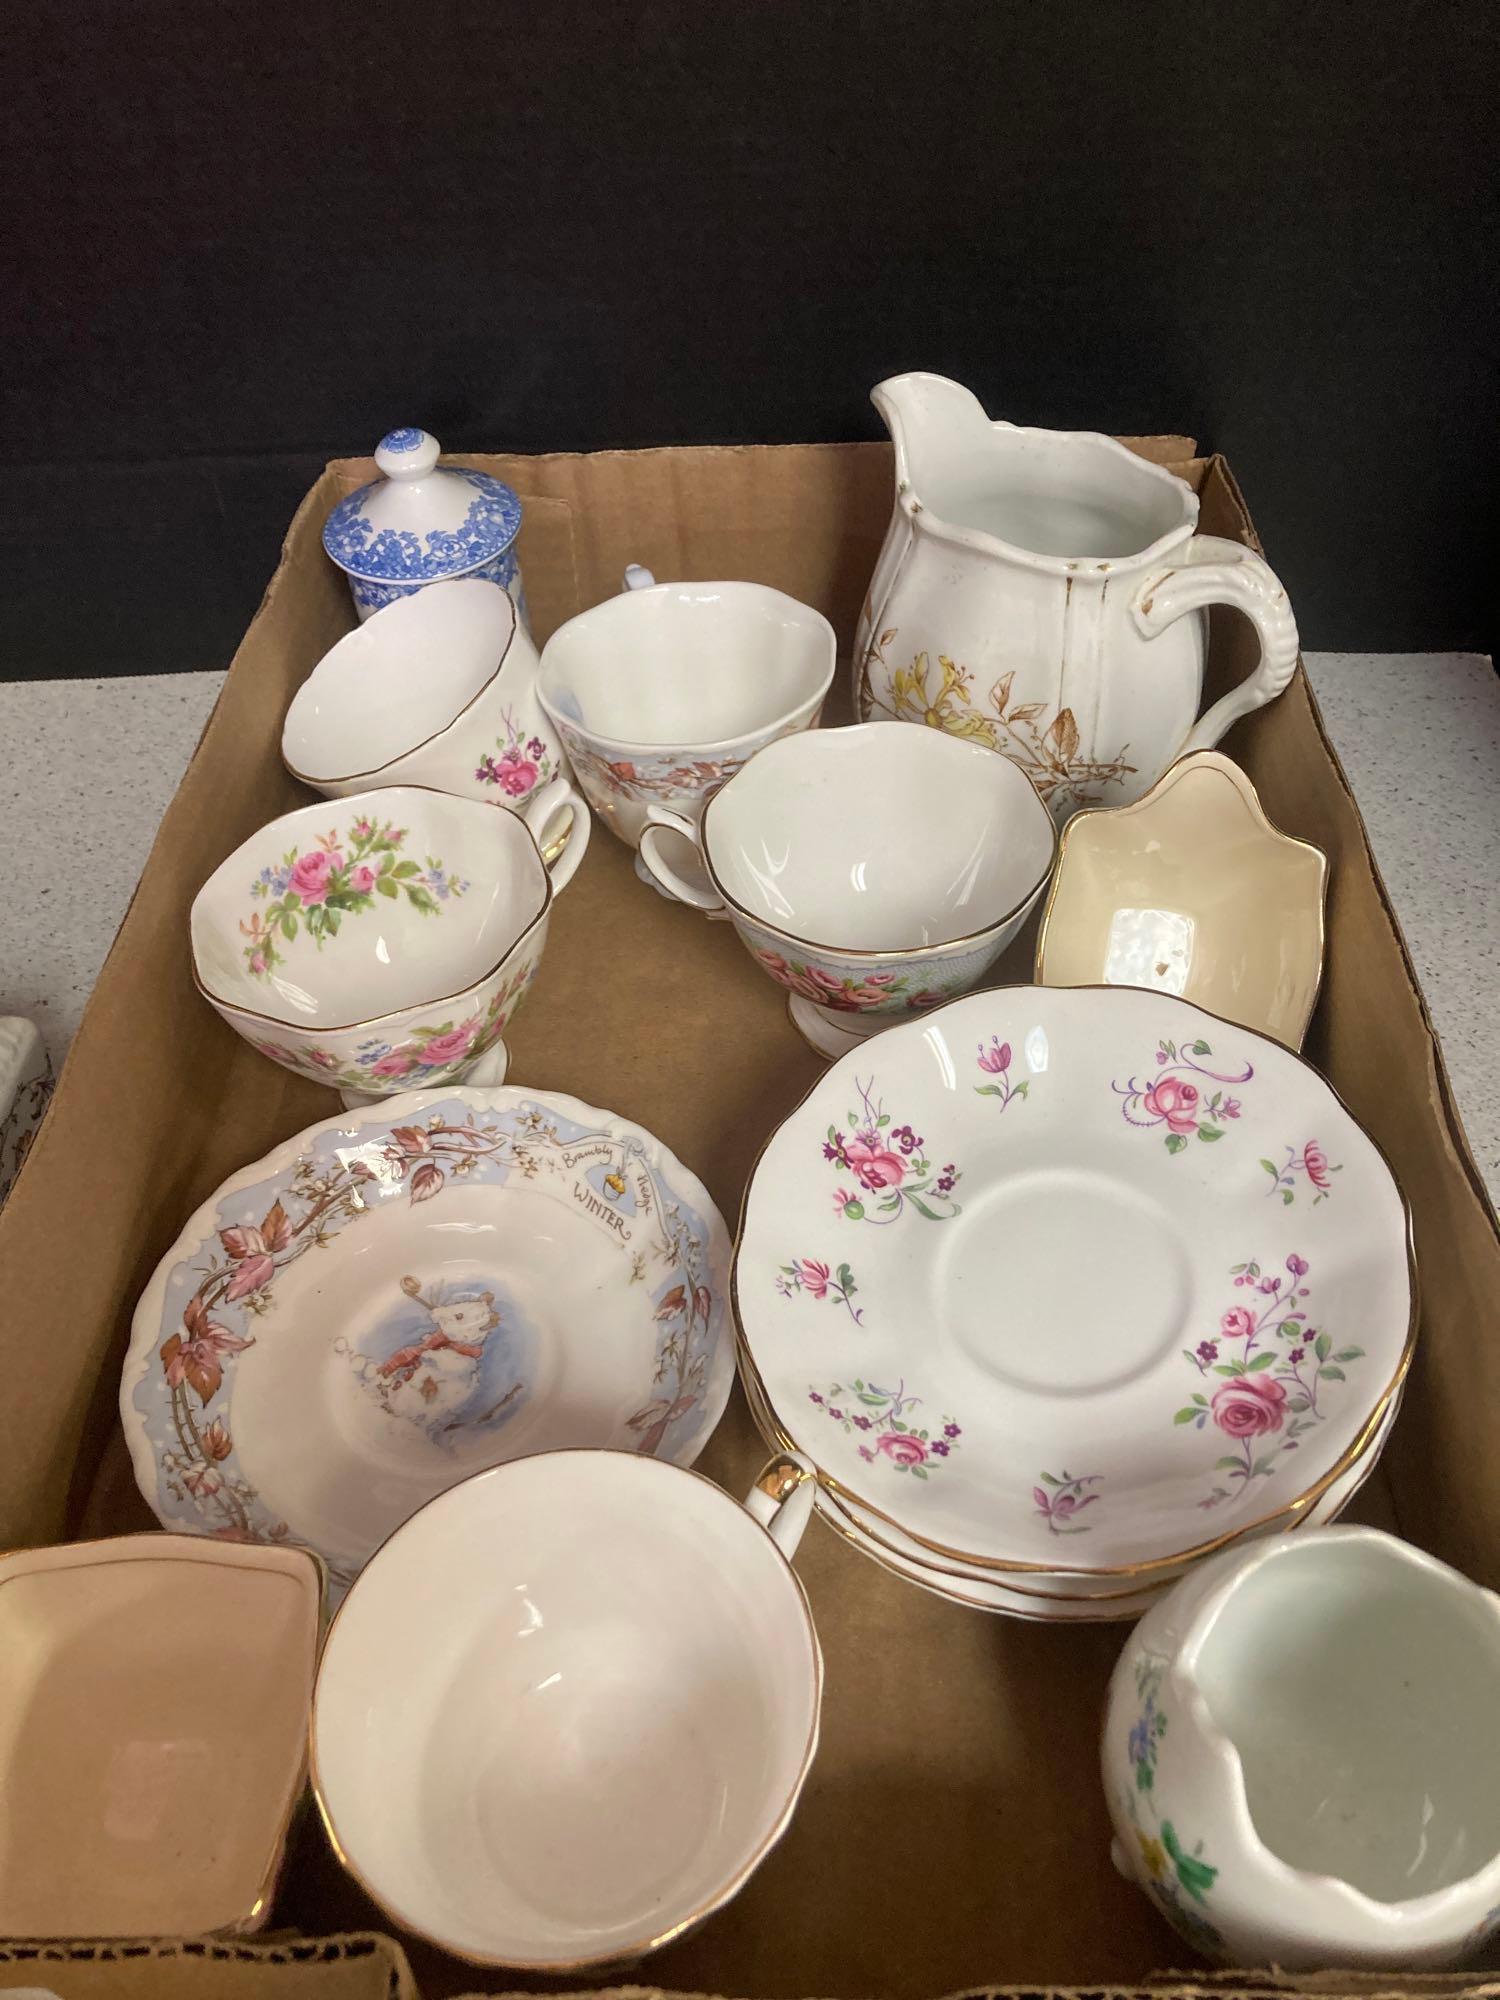 3 flats of porcelain and china vases pitchers tea cups and saucers